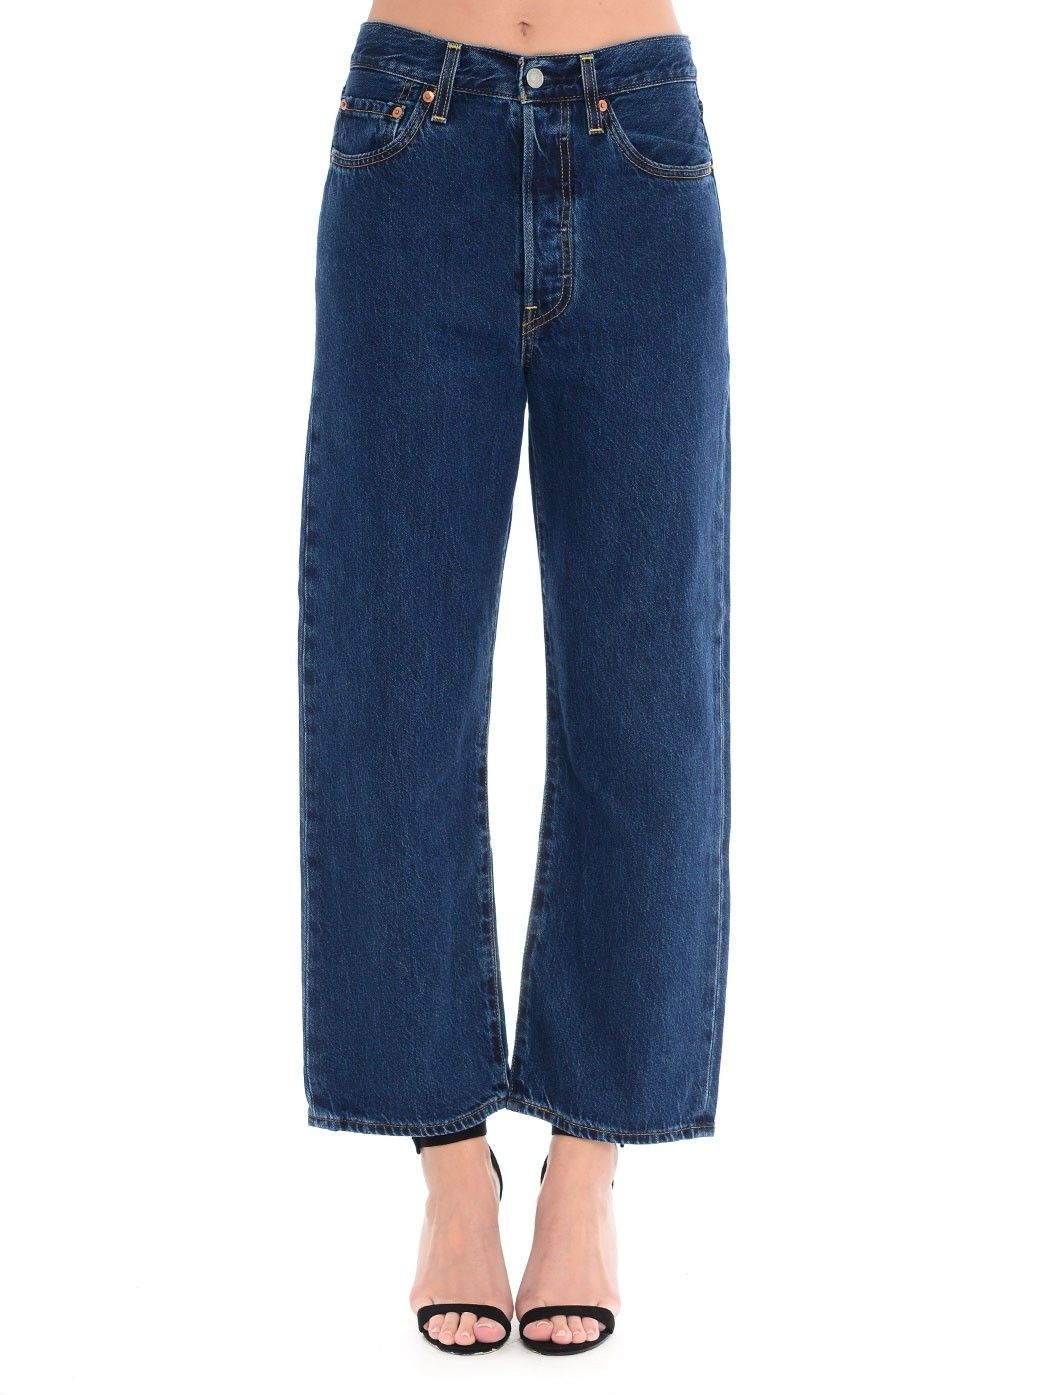  WOMAN TROUSERS,PALAZZO TROUSERS,SKINNY TROUSERS,MARNI TROUSERS,FORTE FORTE TROUSERS,8PM TROUSERS,MSGM TROUSERS,CROP PANTS  LEVI'S 72693